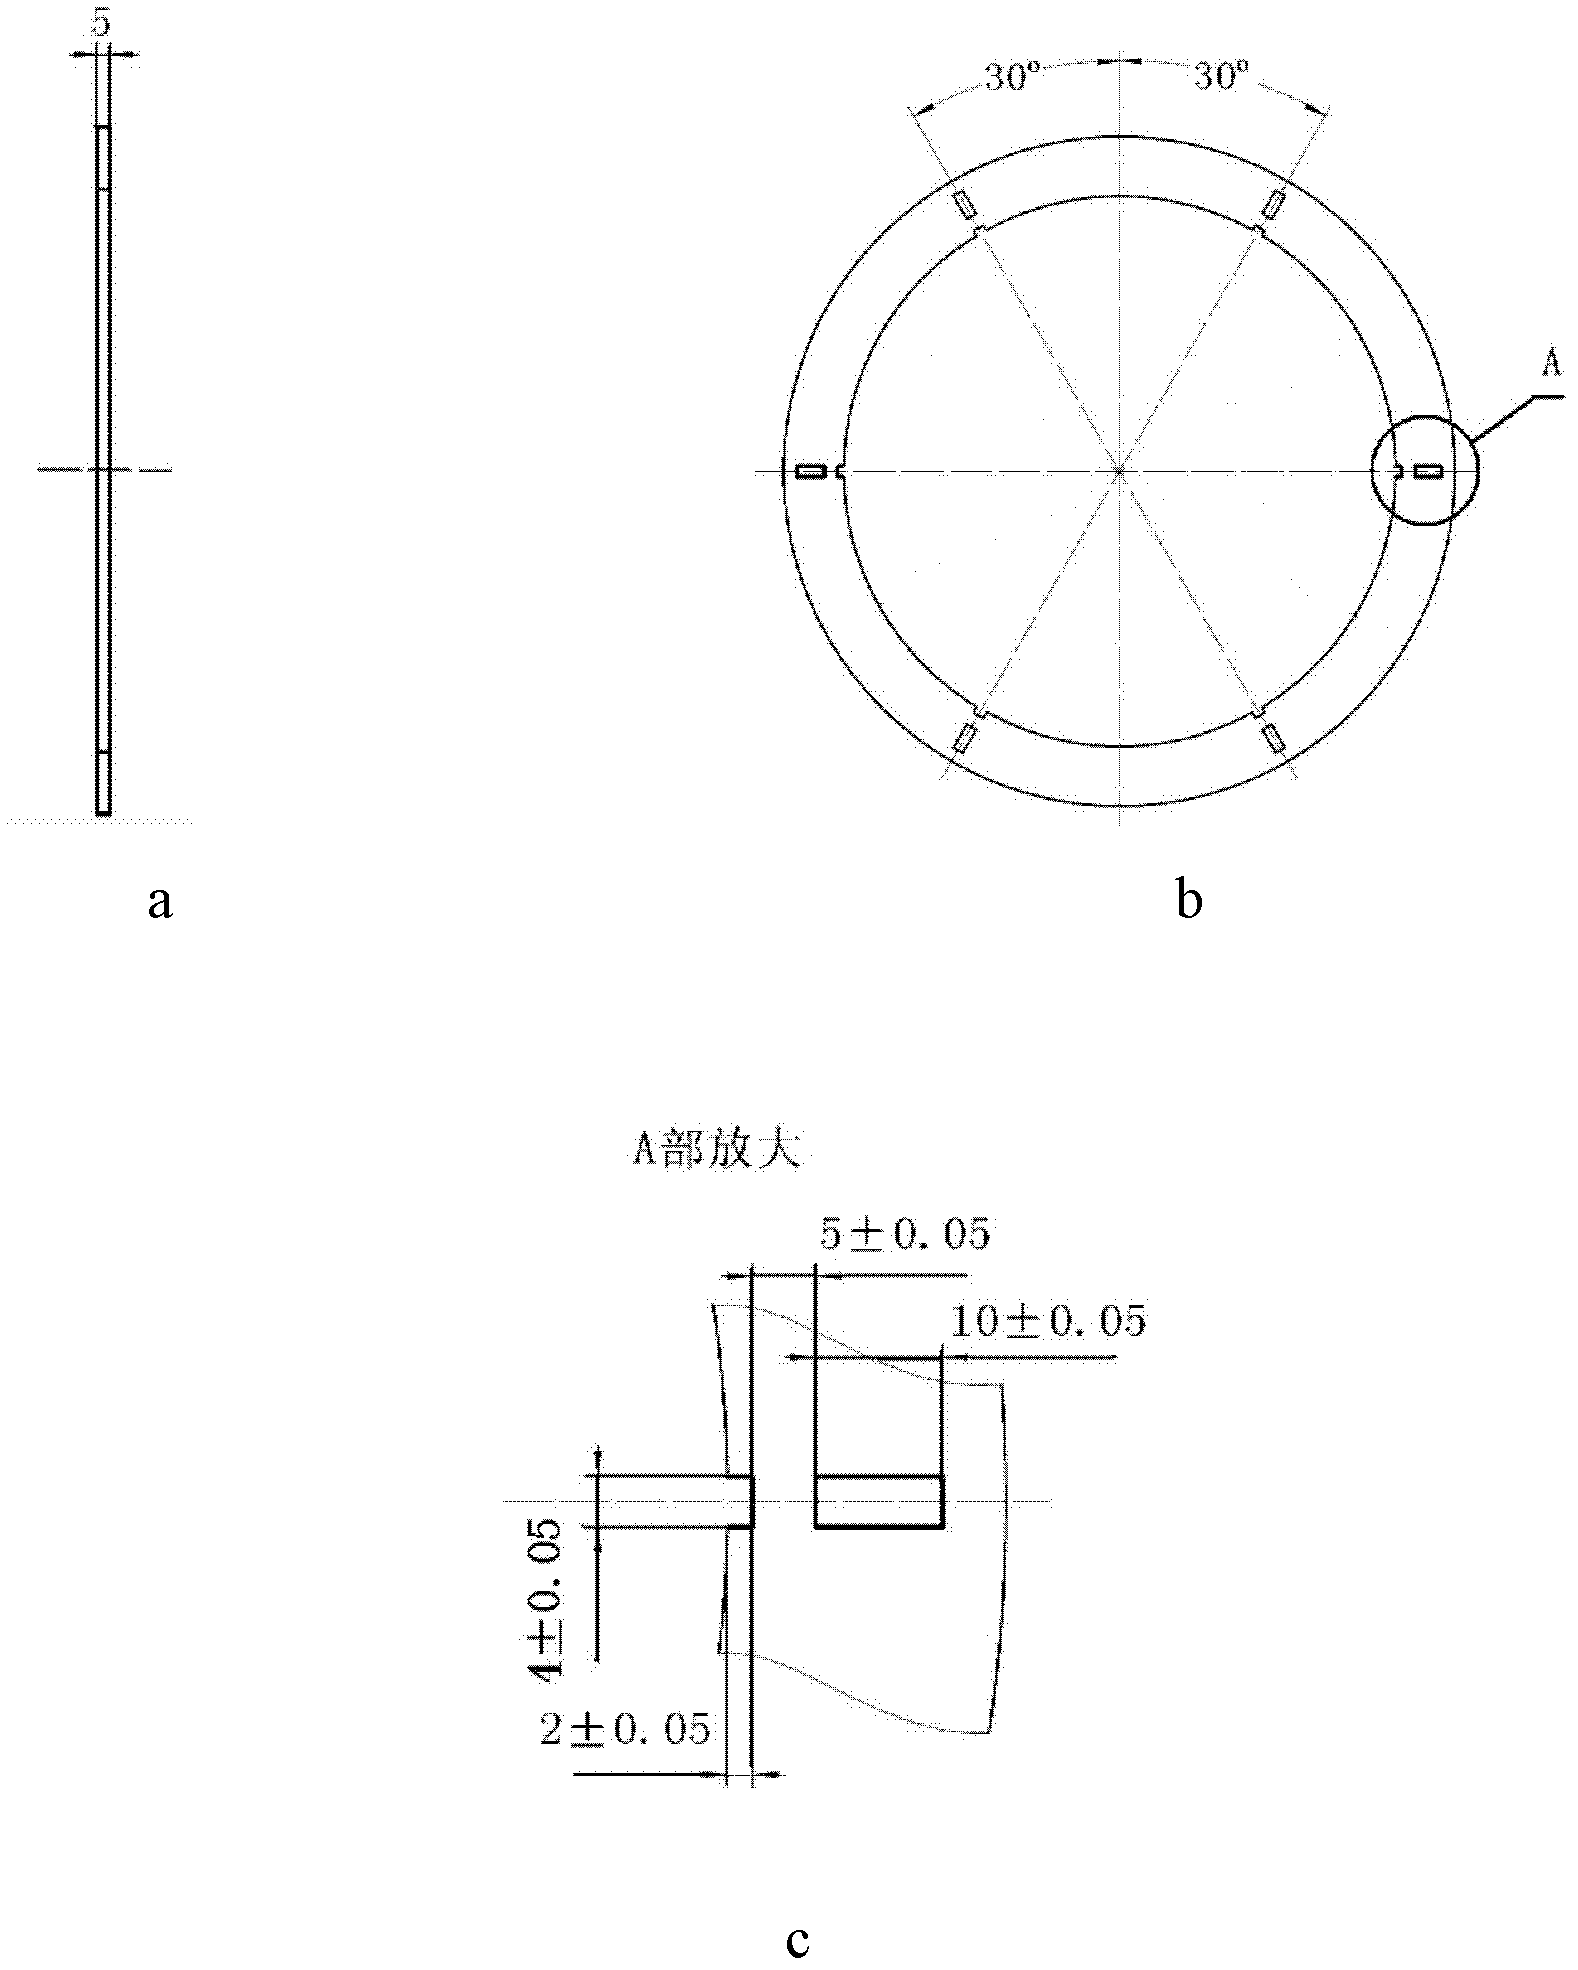 Framework applied to superconductive solenoid magnet